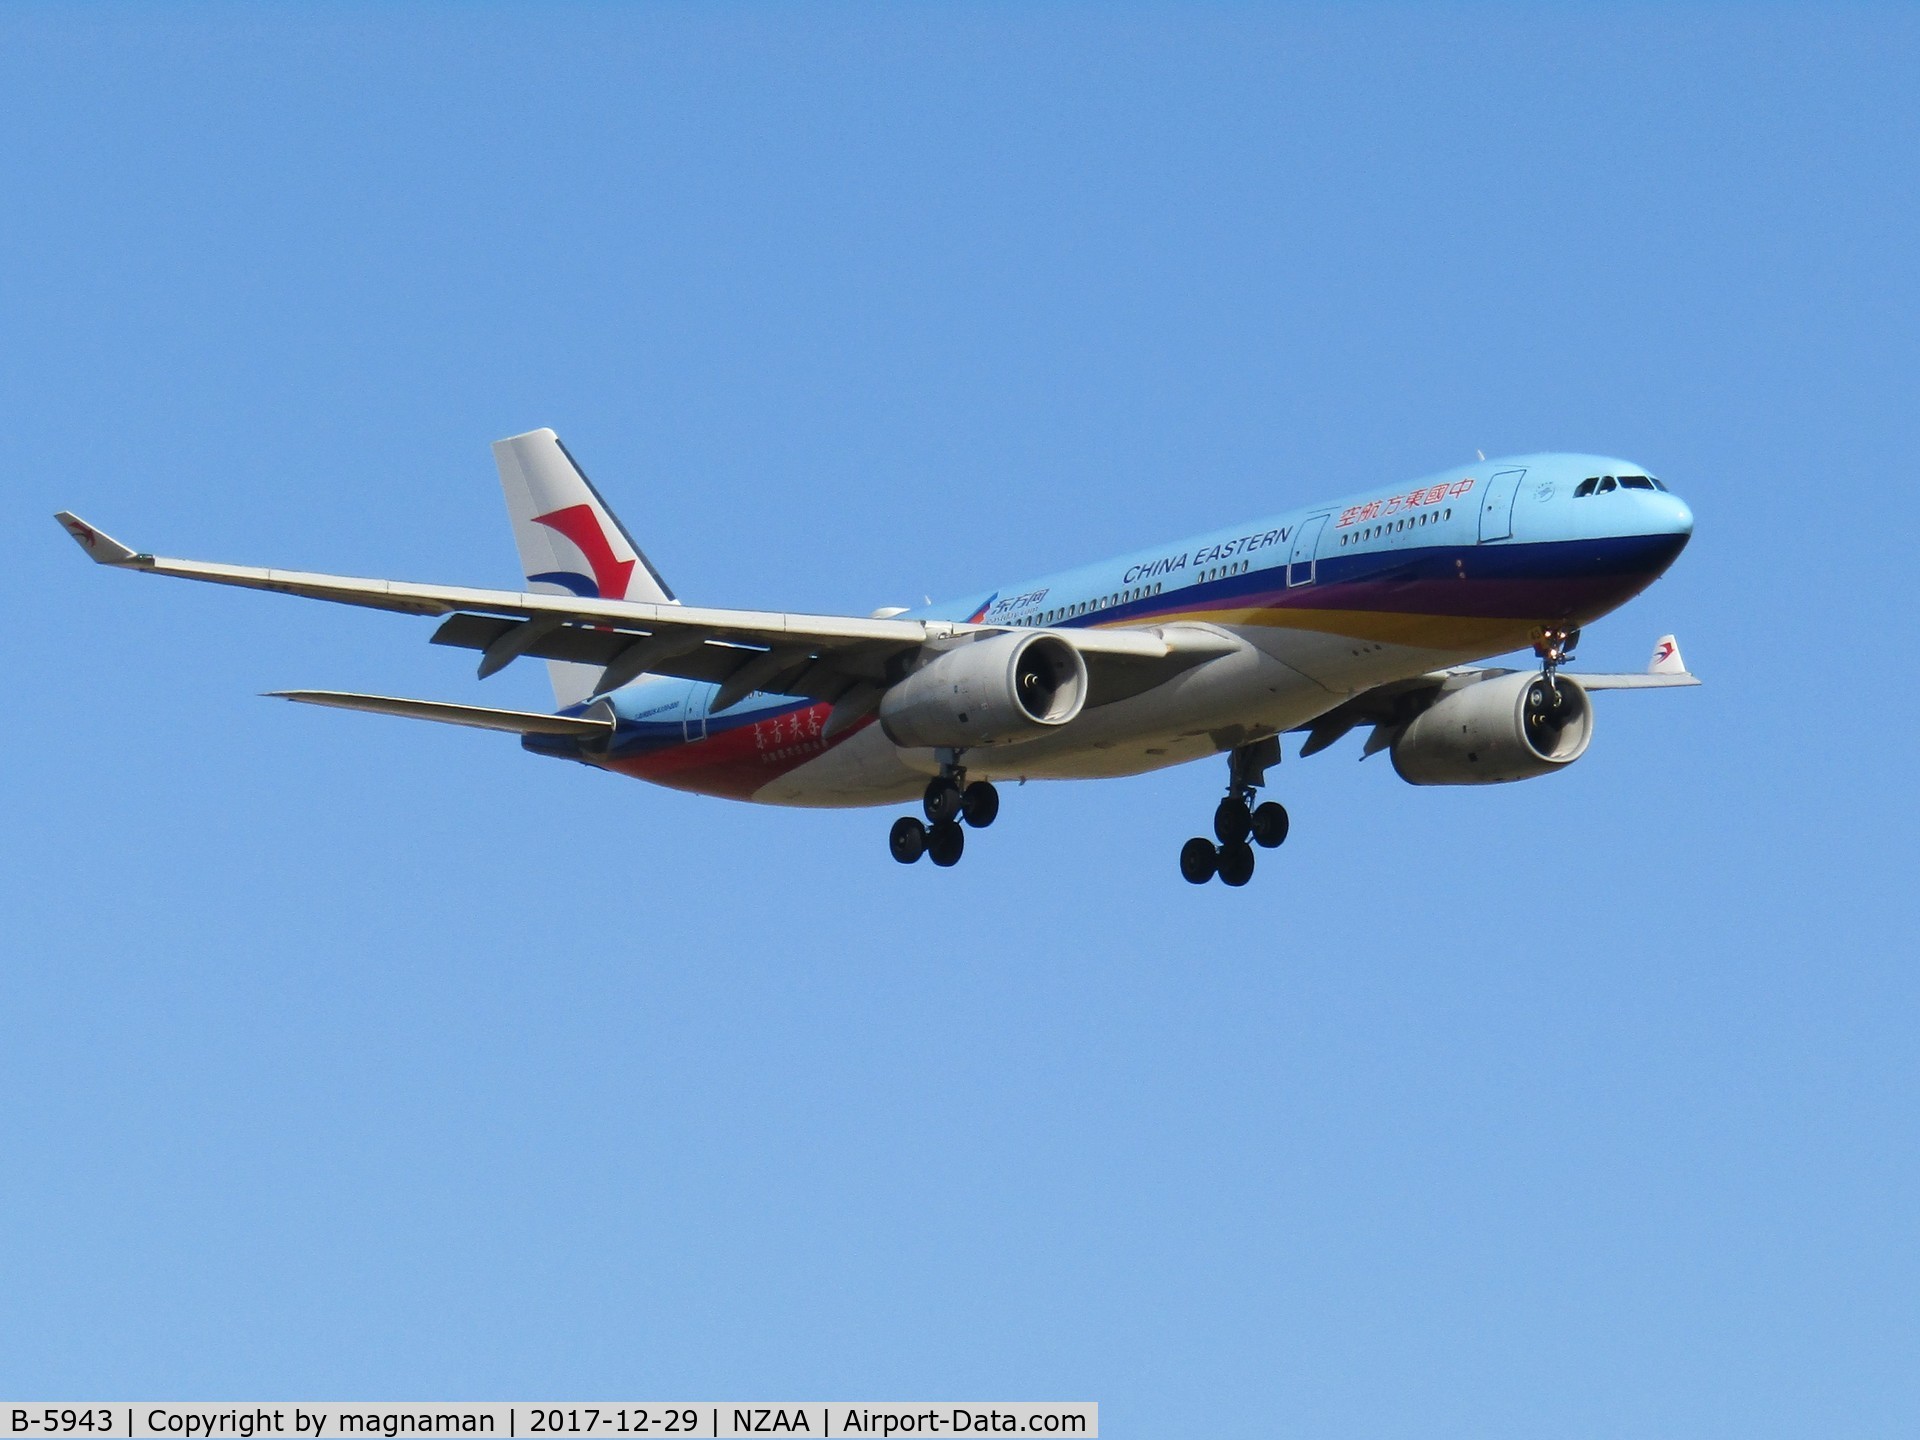 B-5943, 2014 Airbus A330-243 C/N 1520, special c/s on finals